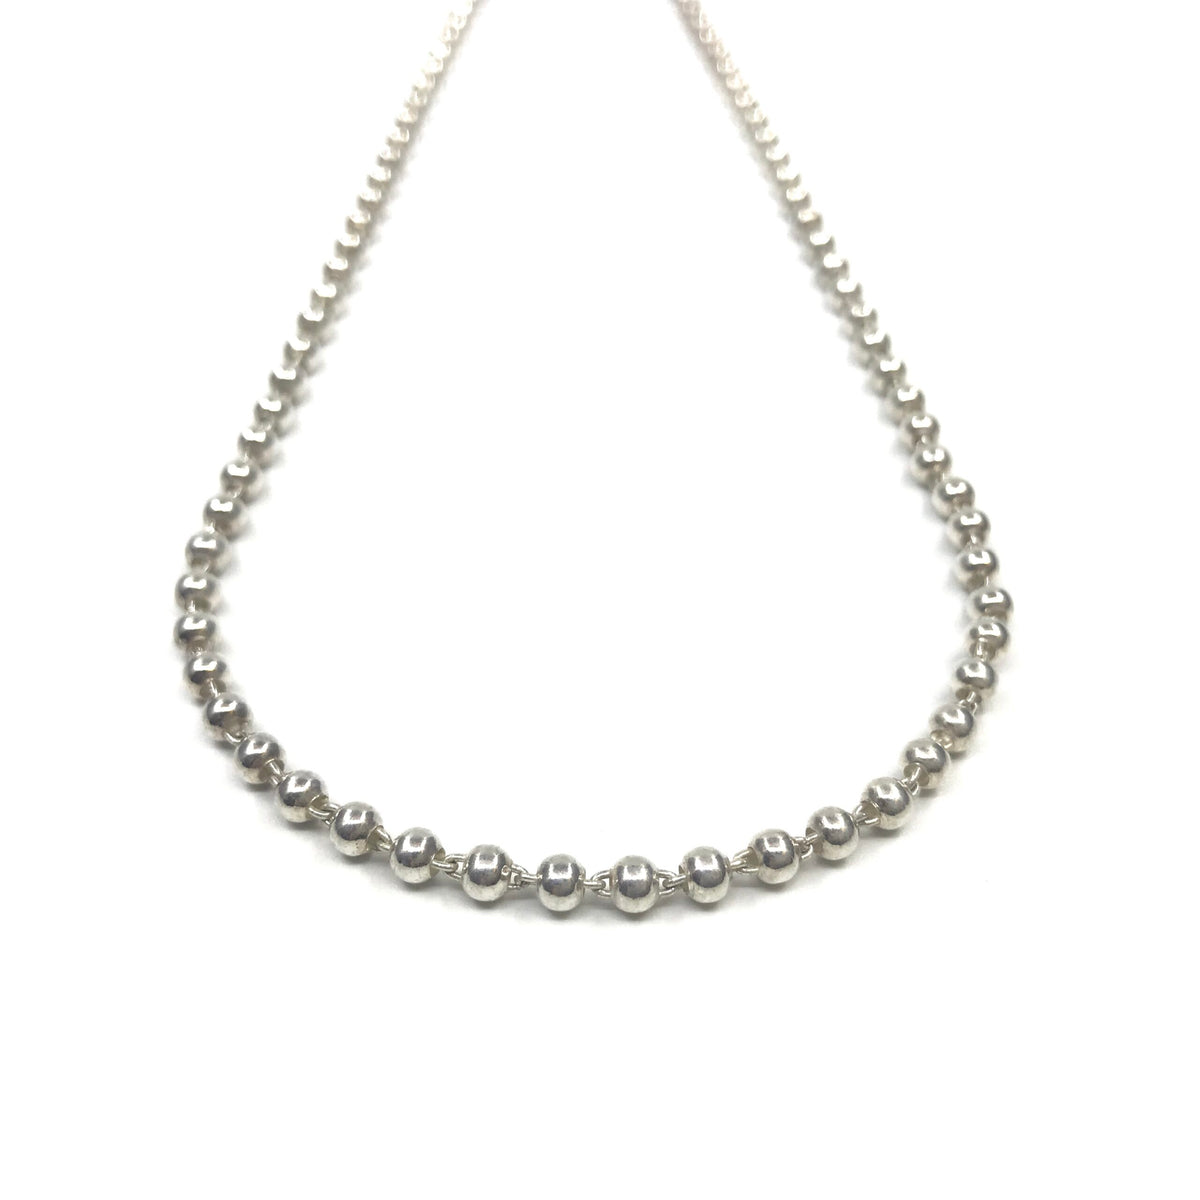 Silver Necklace - Big Ball Links